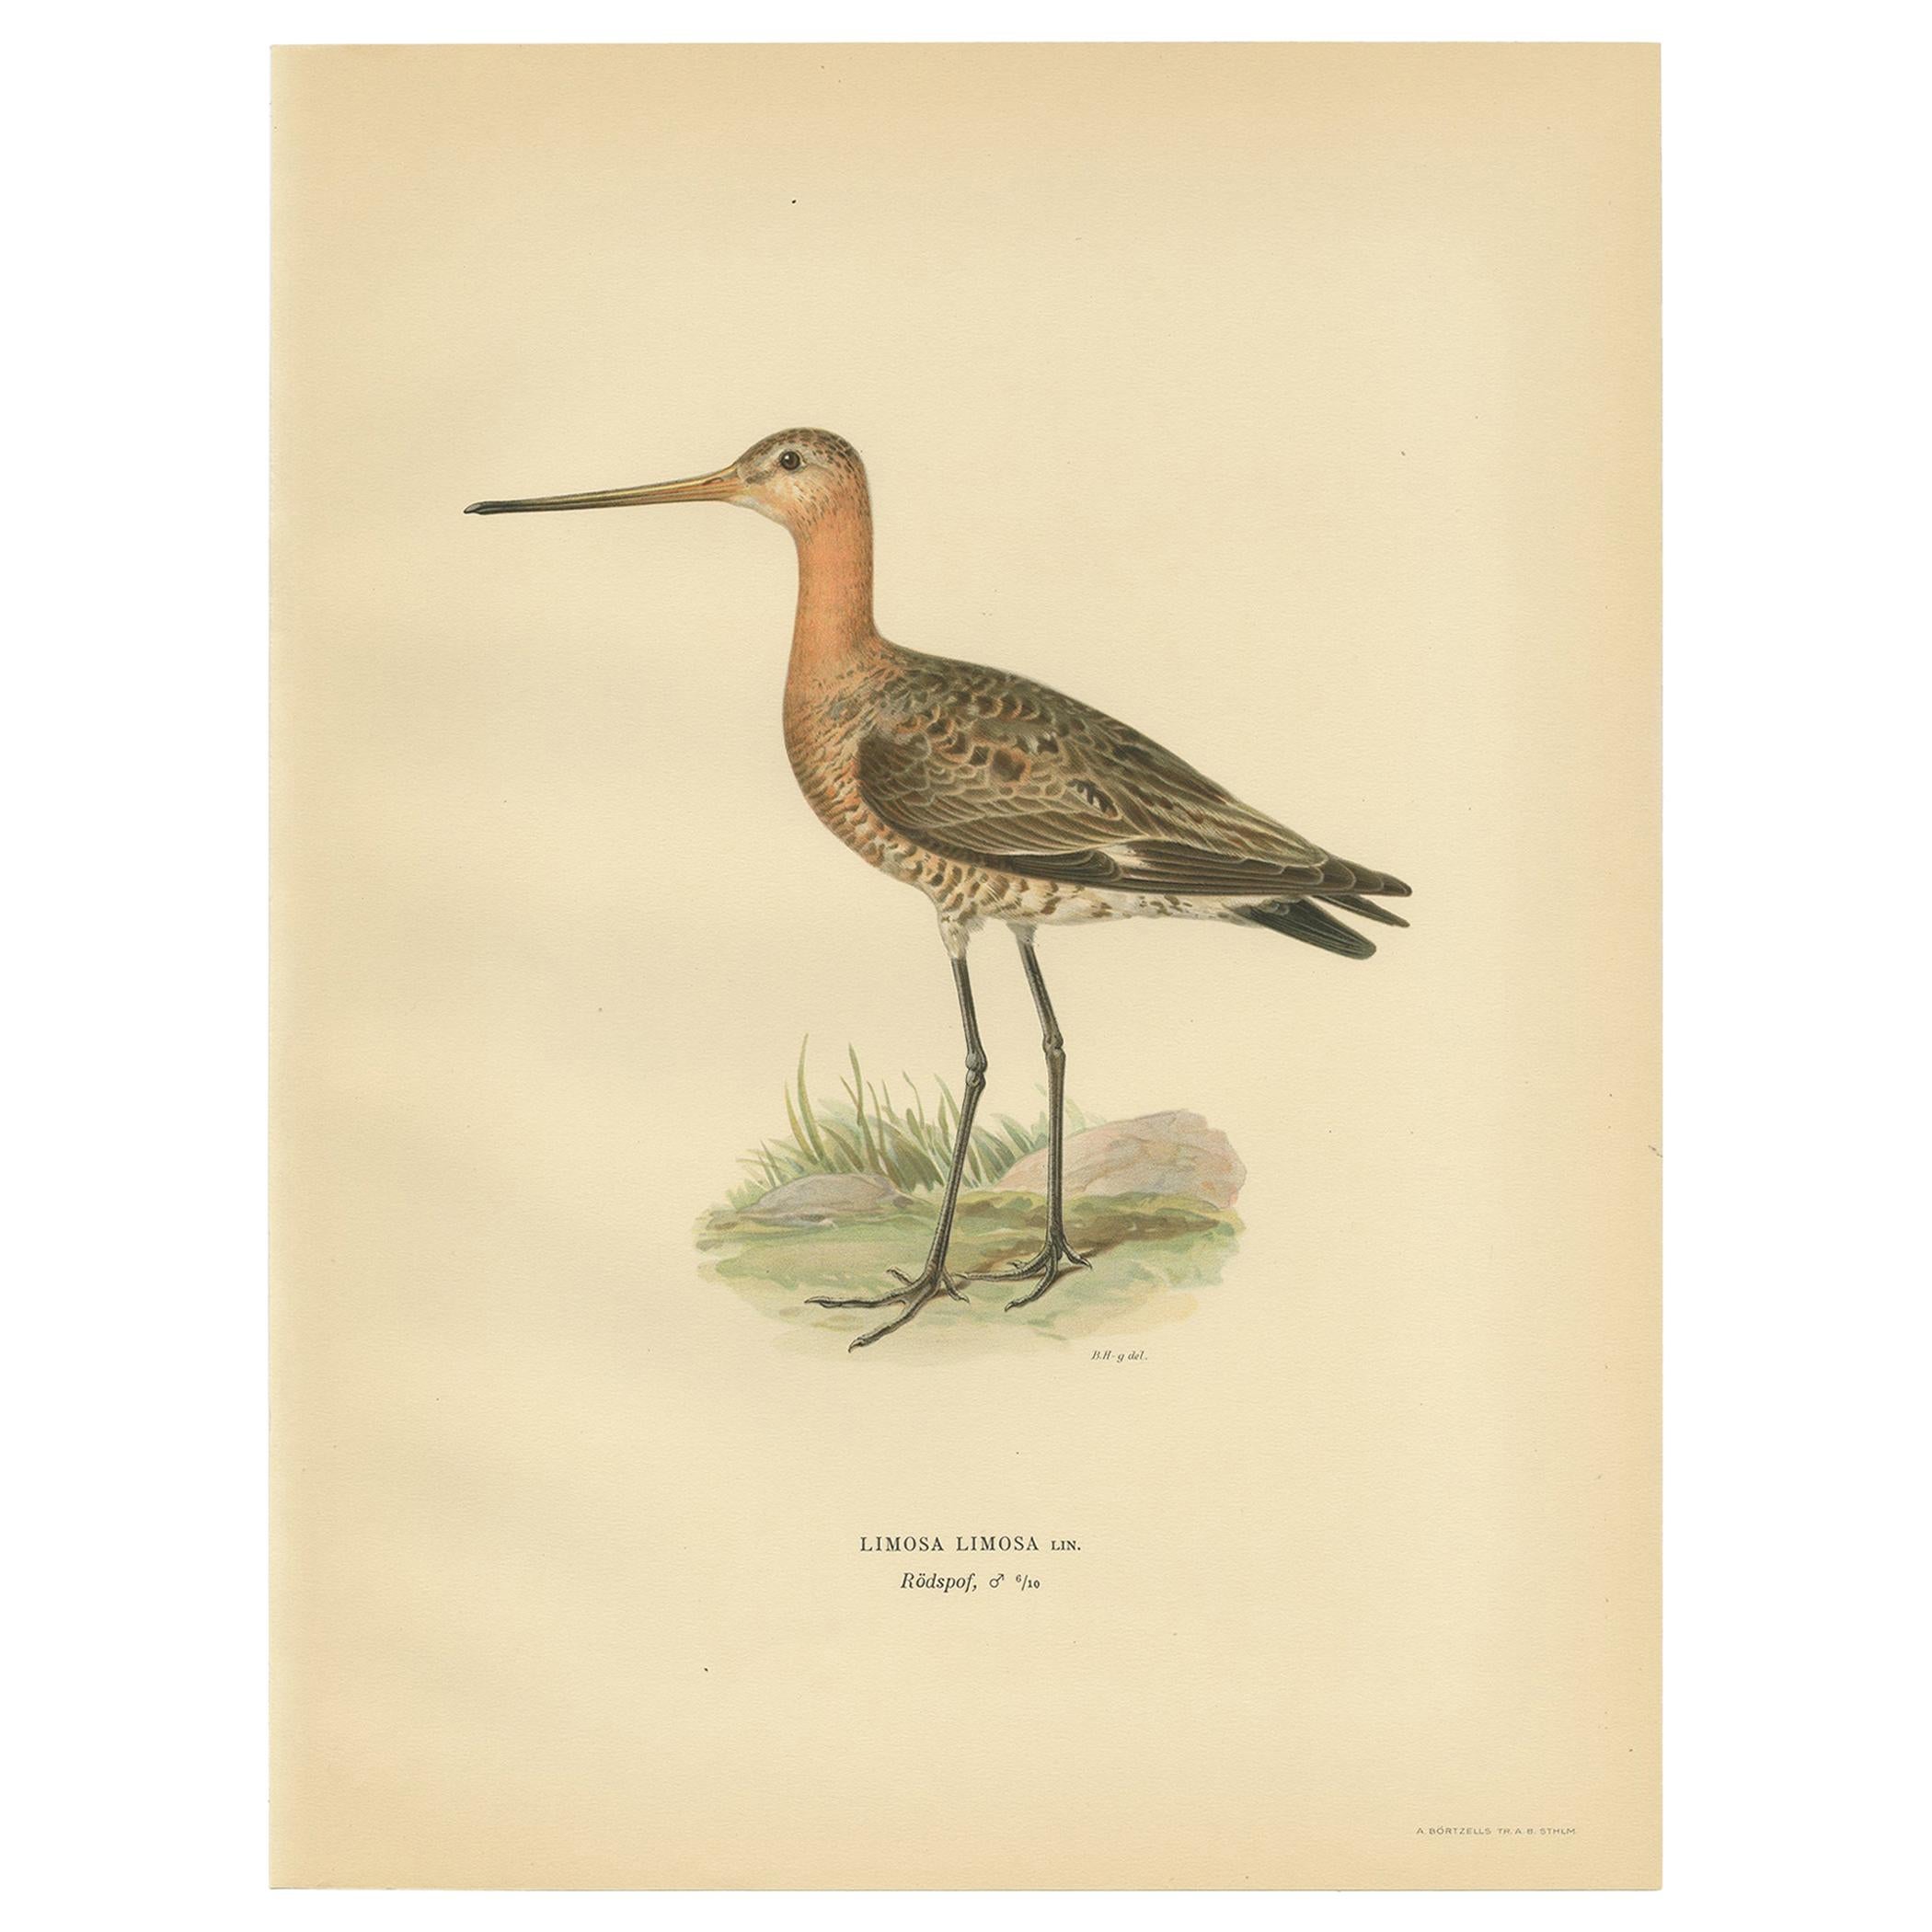 Antique Bird Print of the Black-Tailed Godwit by Von Wright, '1929'